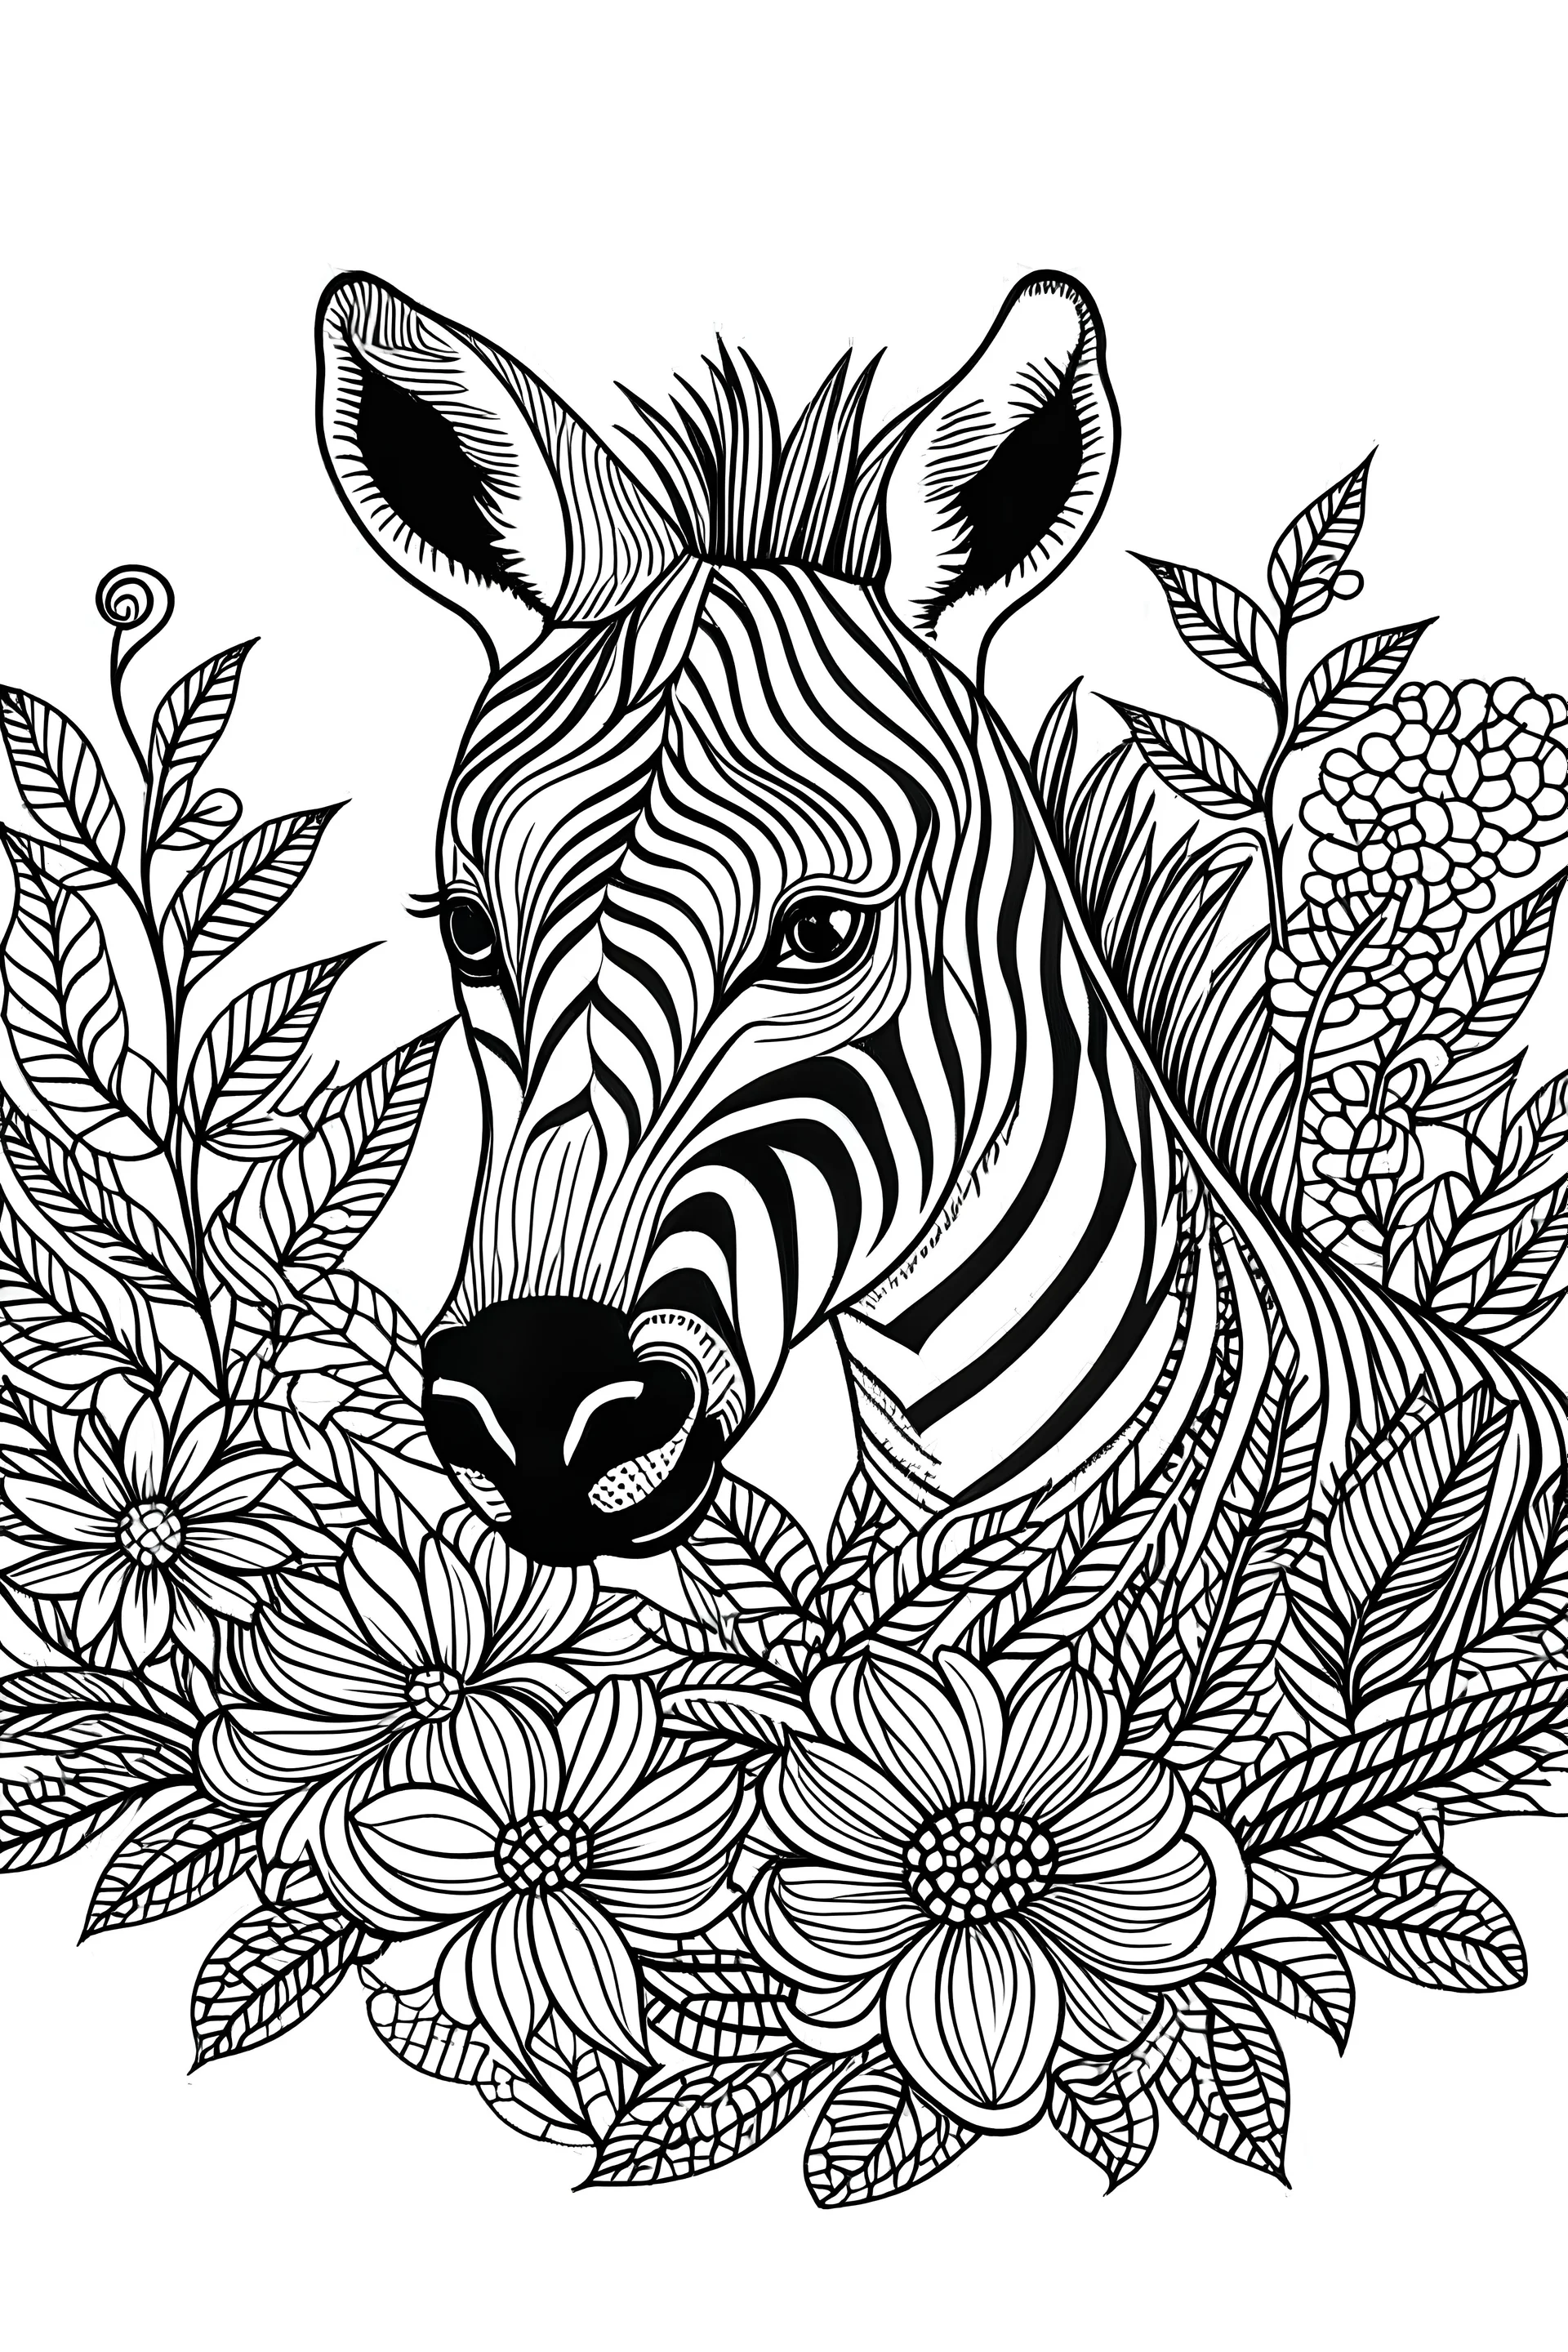 portrait of cute zebra and background fill with flowers on white paper with black outline only